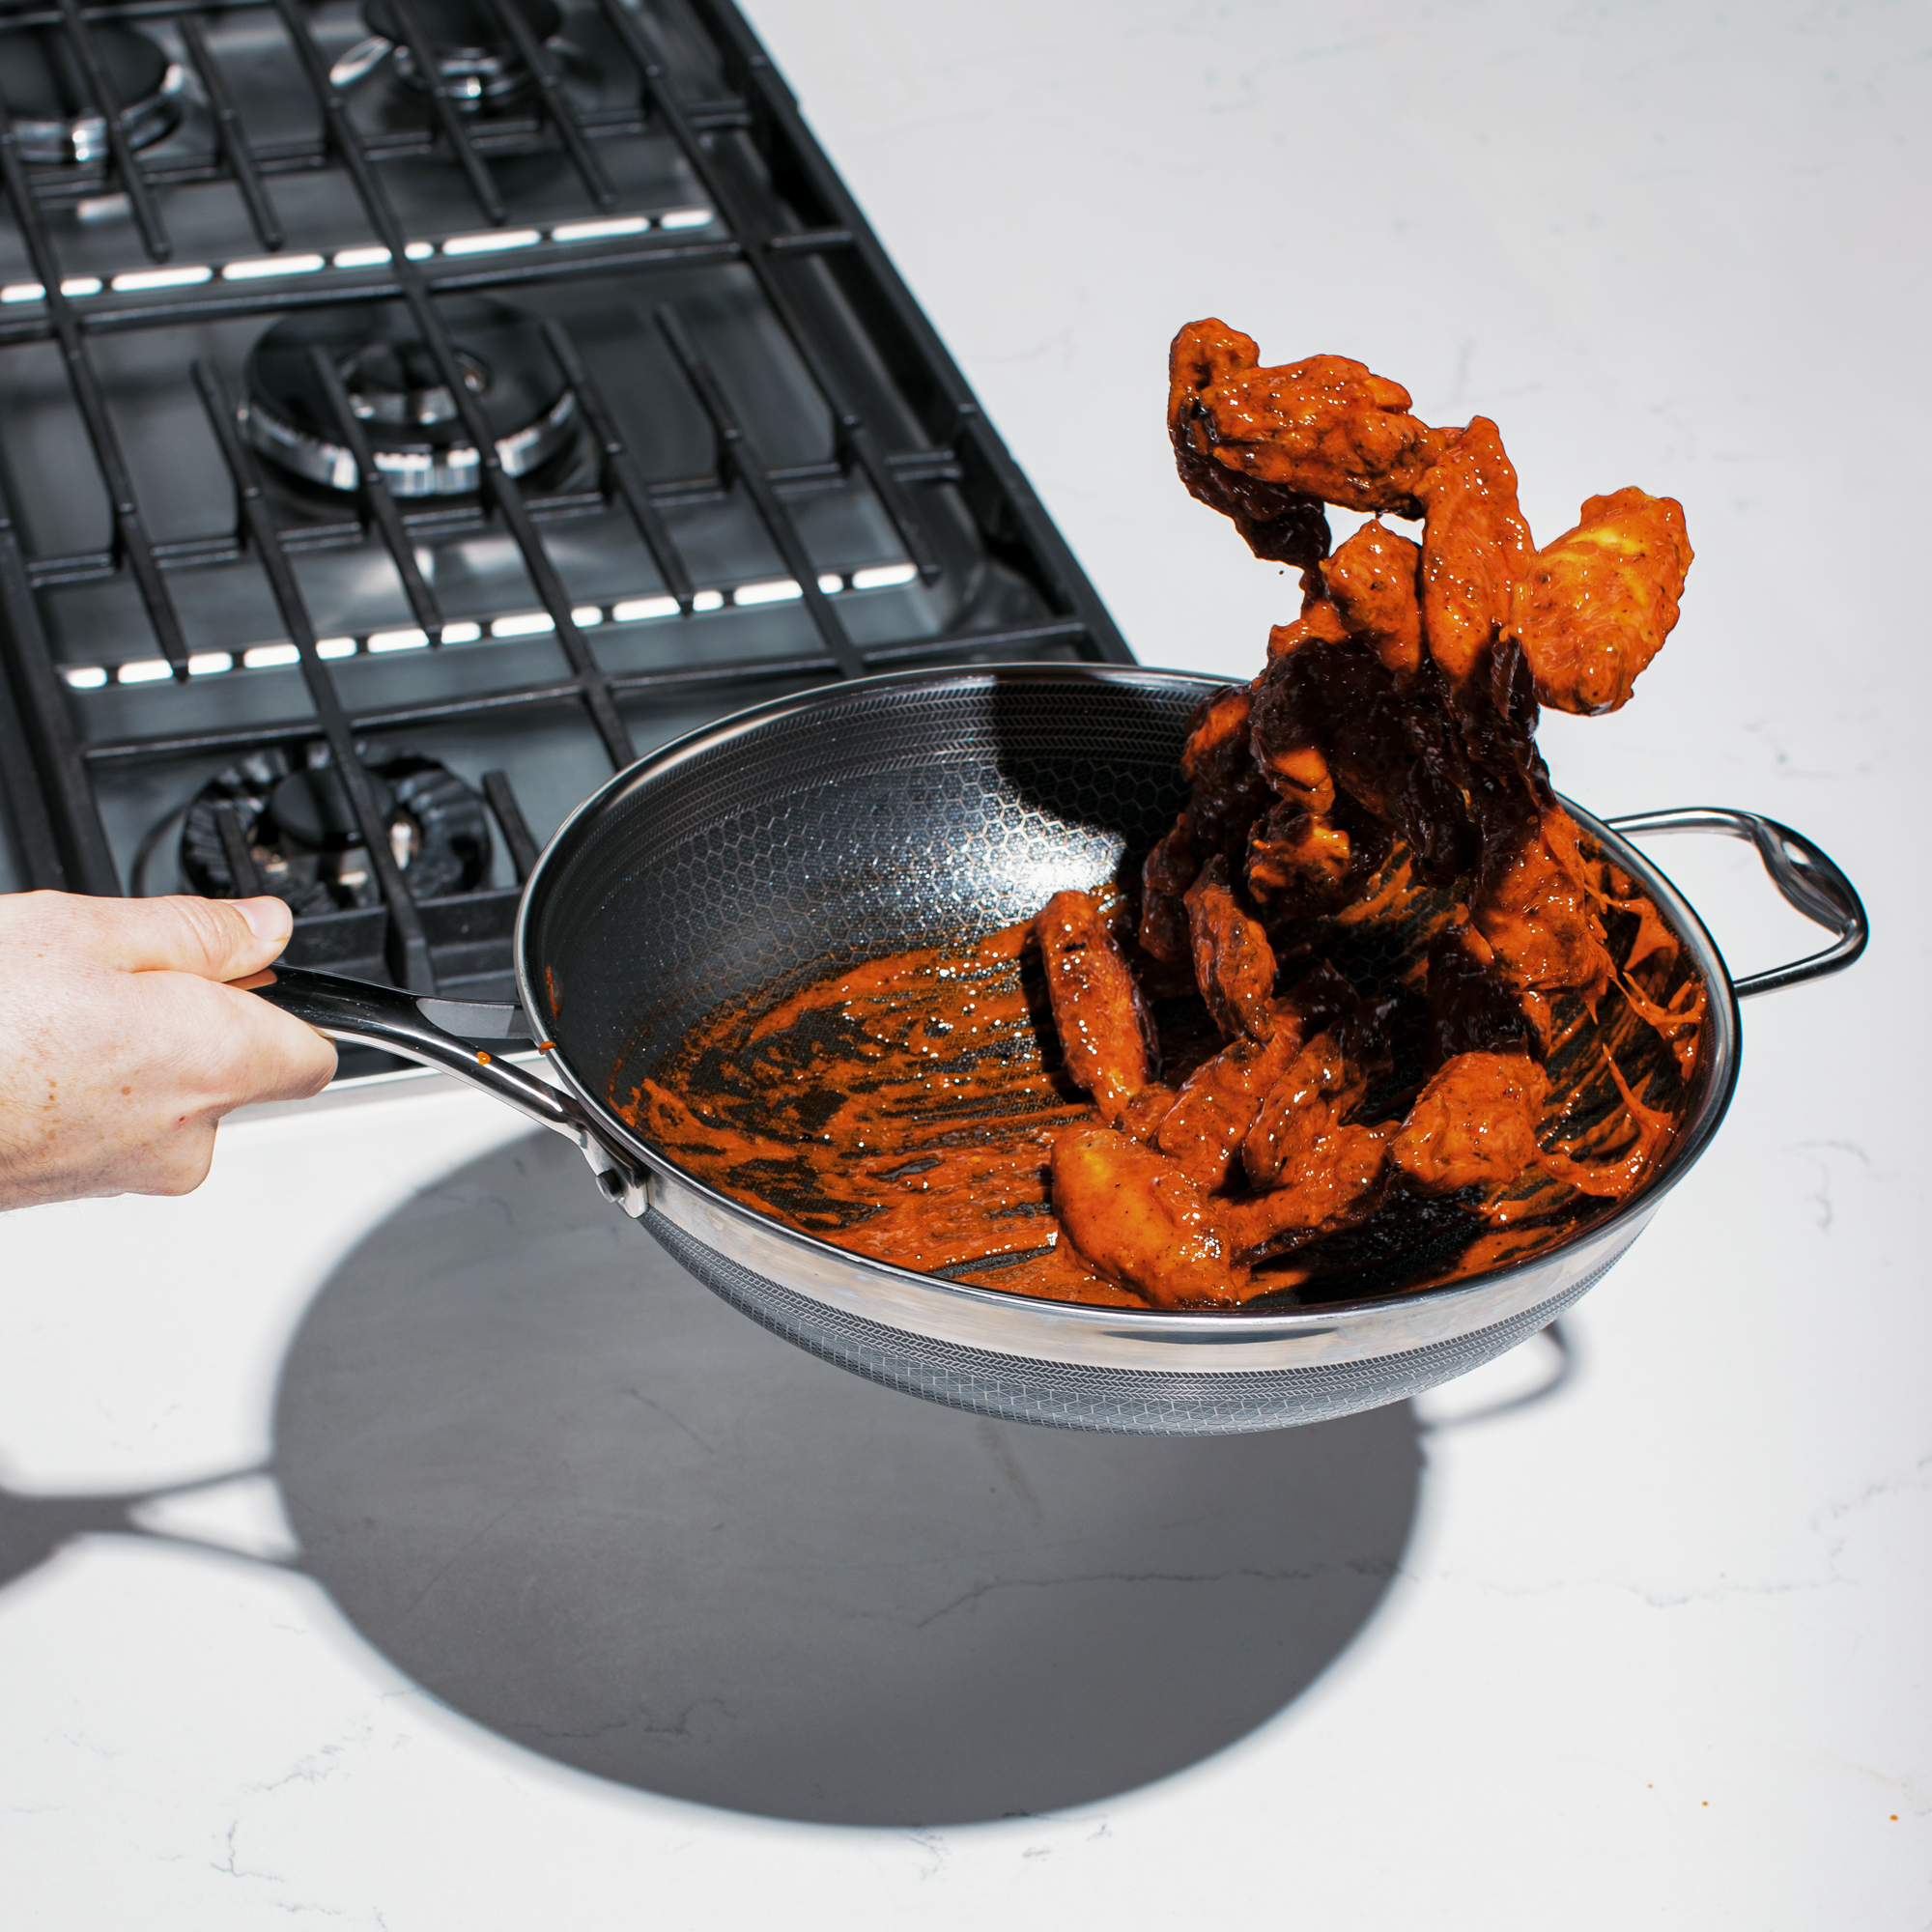 Ceramic vs Cast Iron vs Hybrid: Why HexClad's Cookware Comes Out On Top